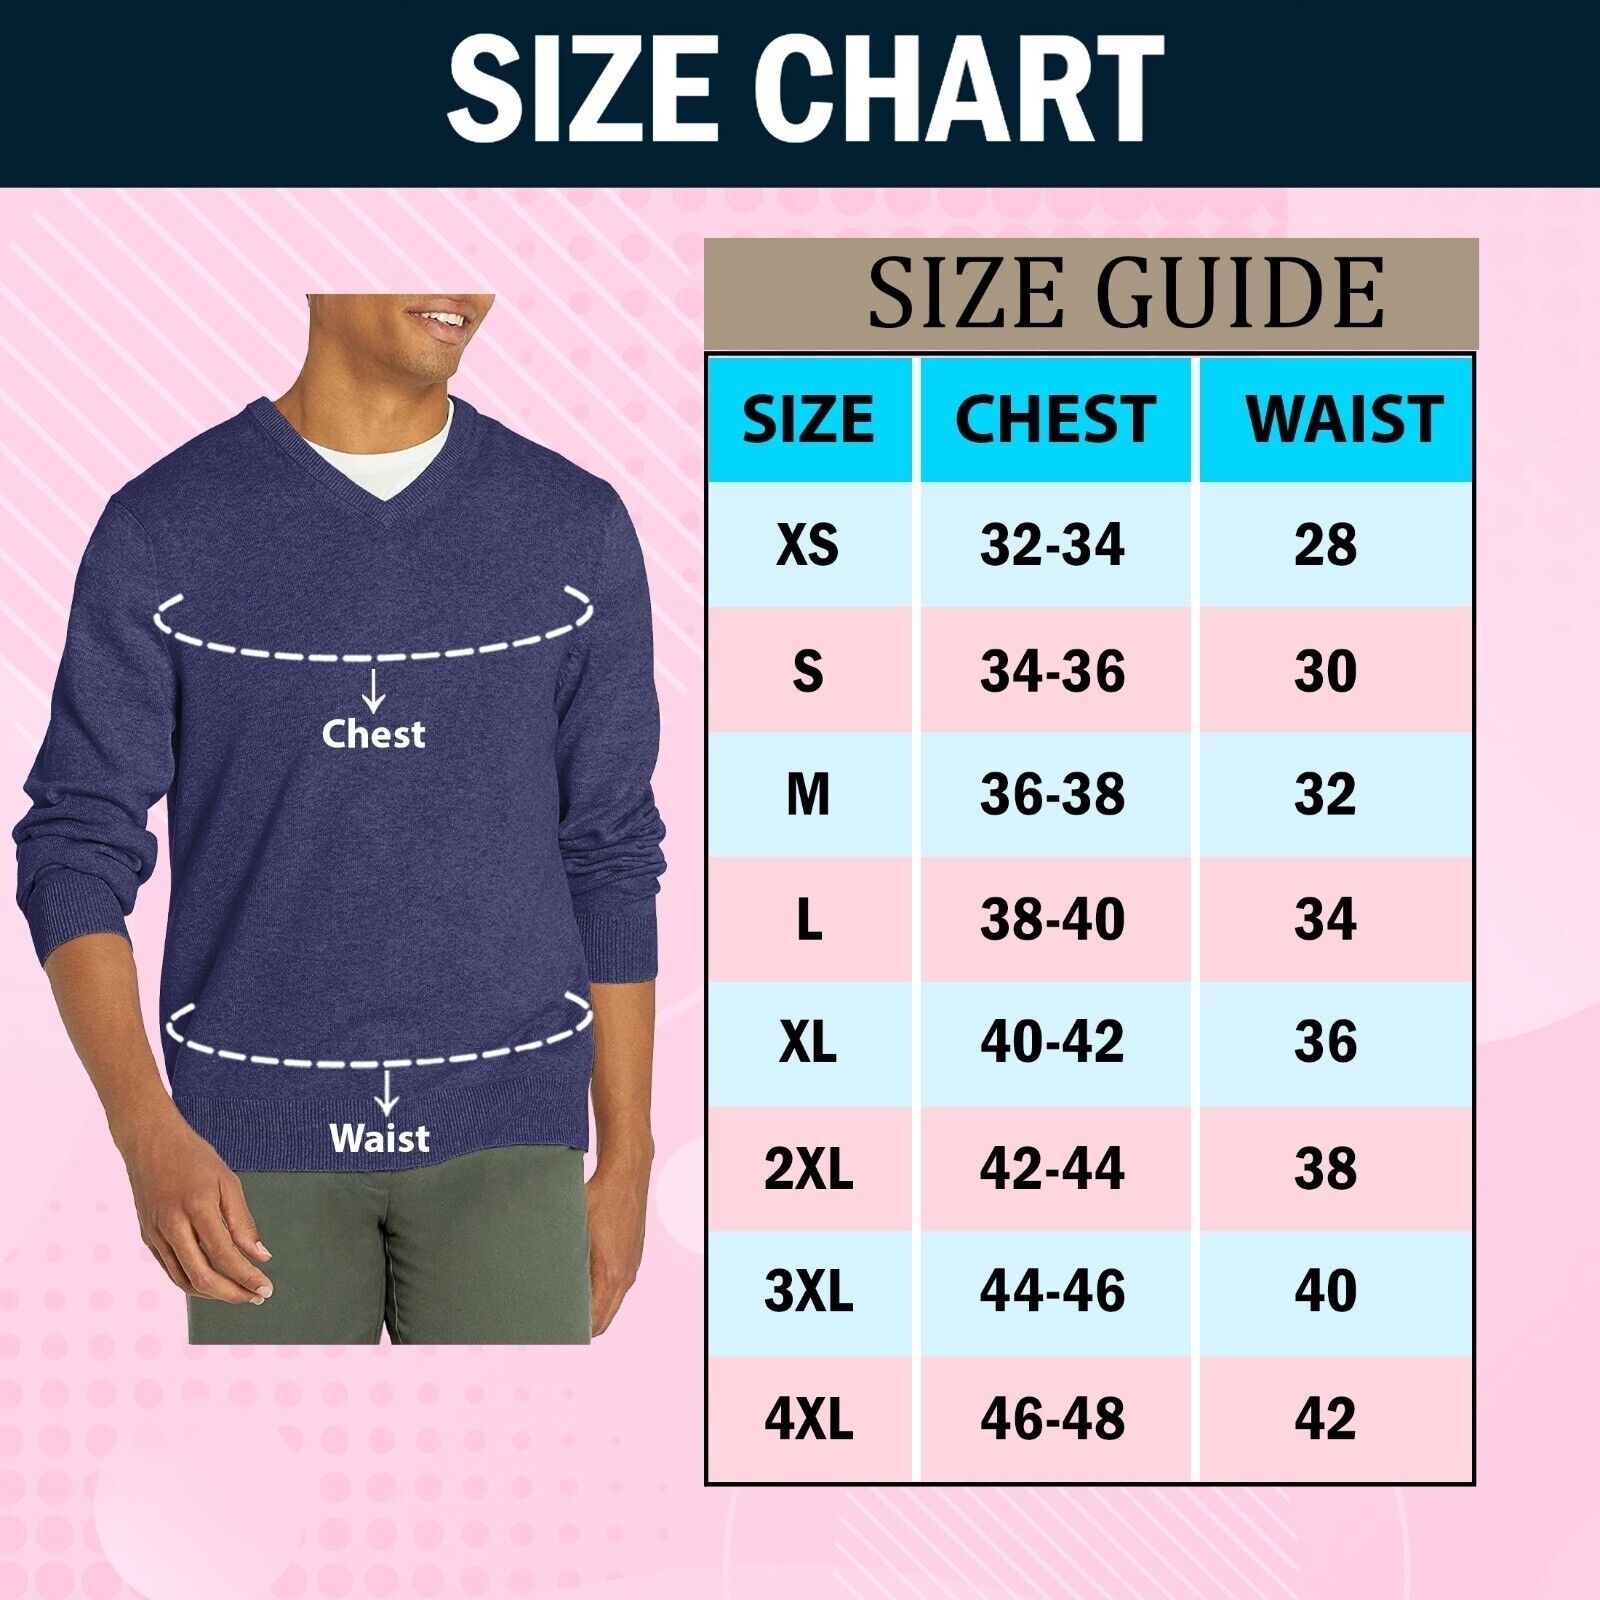 Multi-Pack Mens Cozy Comfy Ultra Soft Slim Fit Warm Knit Pullover V-Neck Sweater - 2, XX-Large